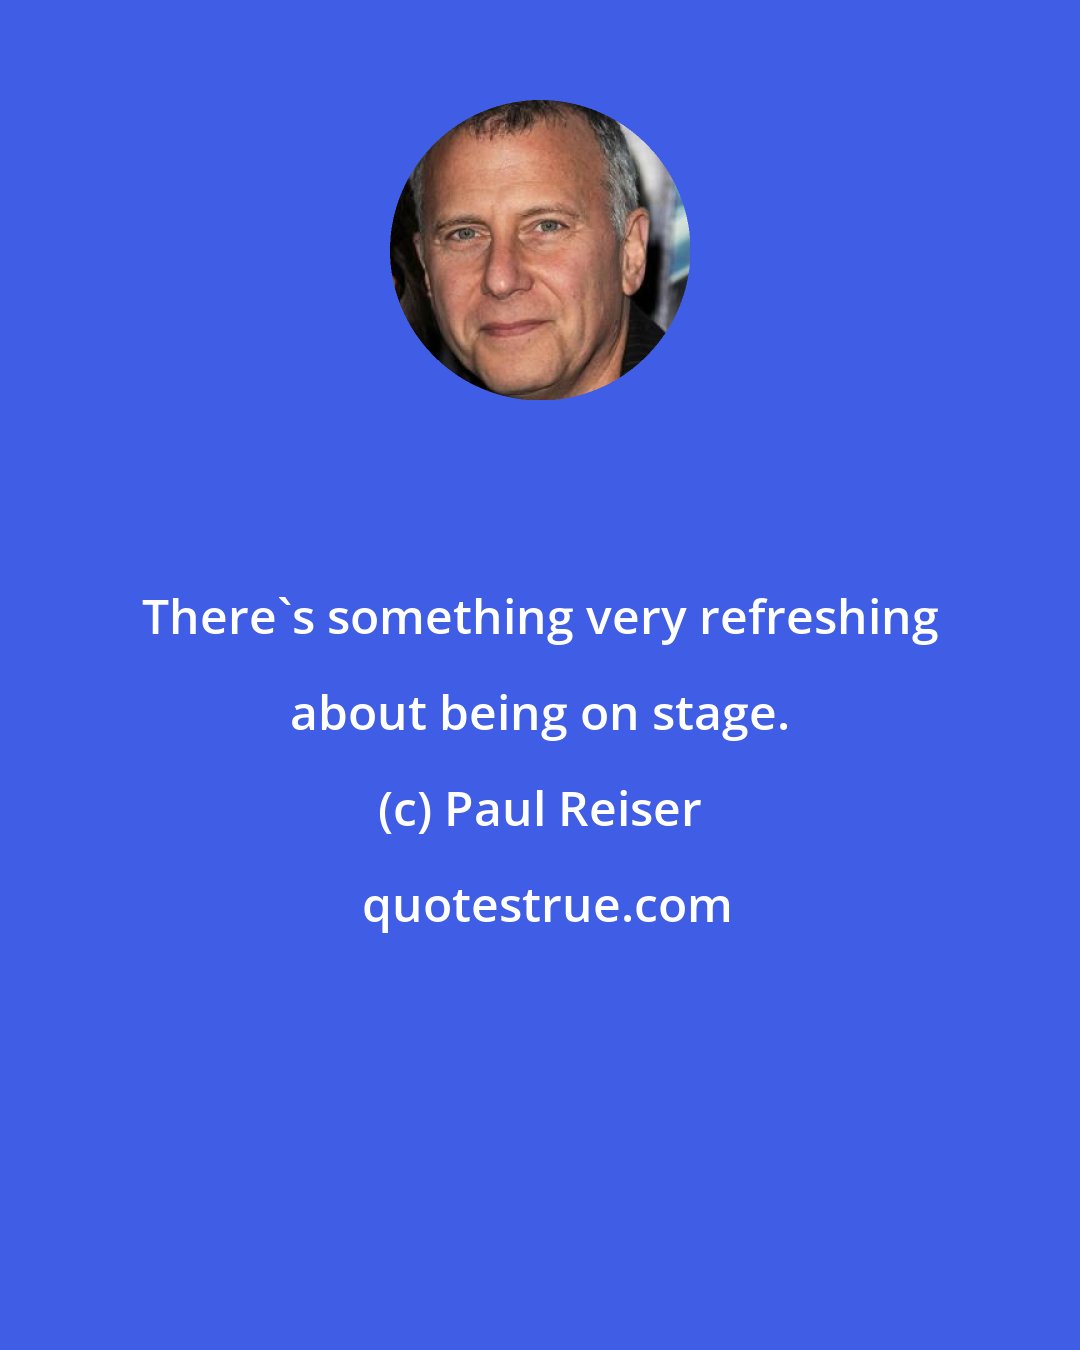 Paul Reiser: There's something very refreshing about being on stage.